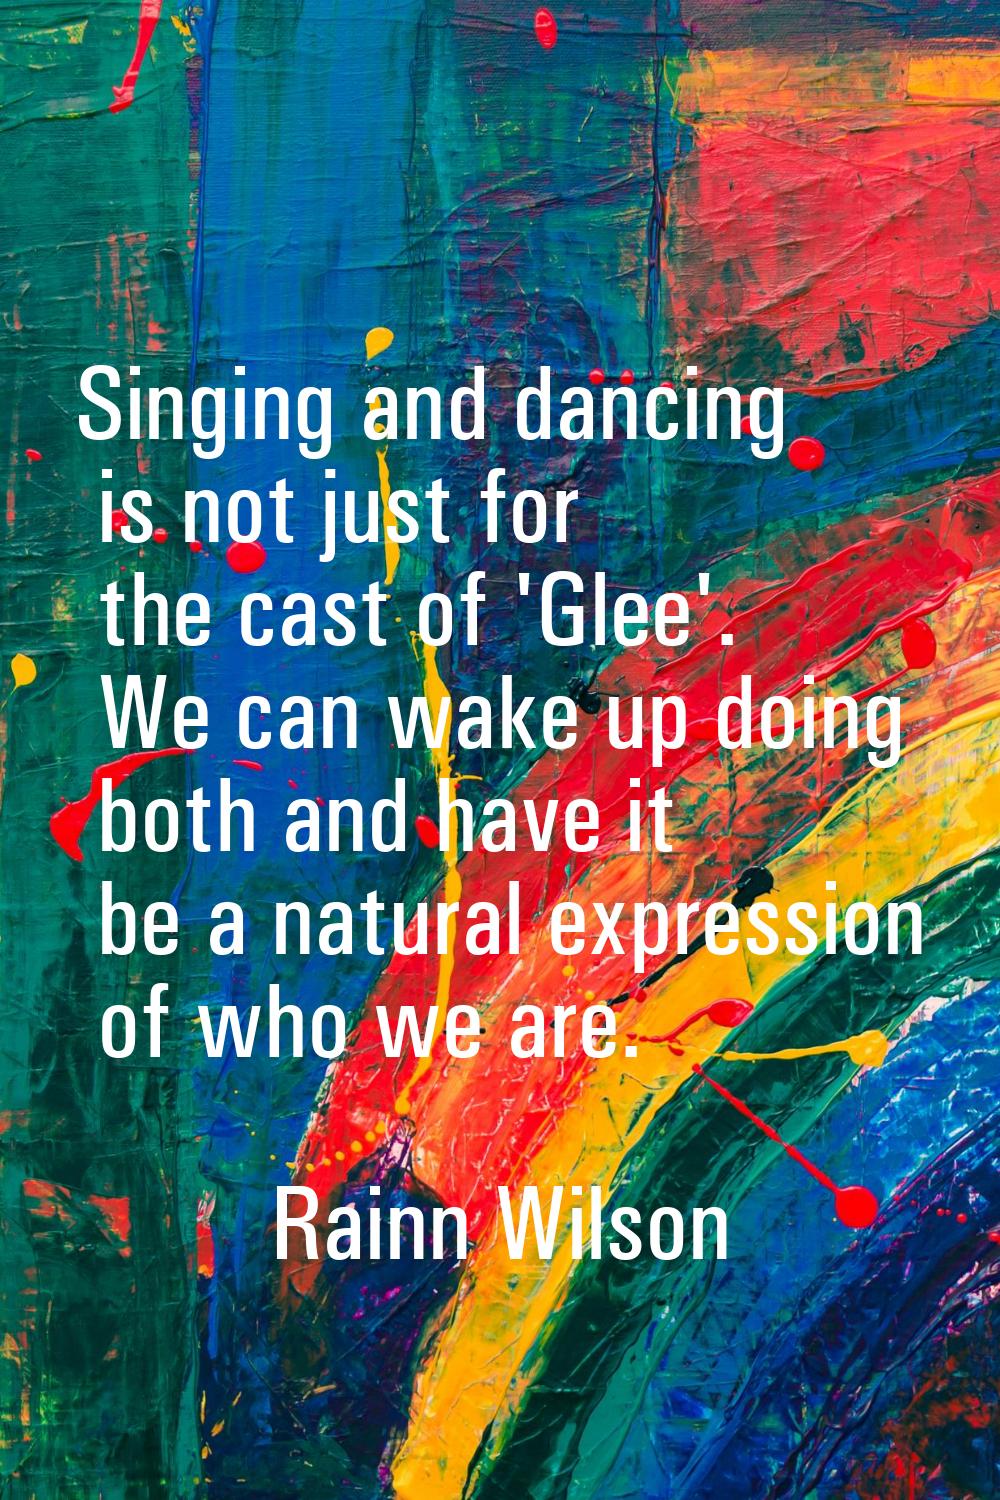 Singing and dancing is not just for the cast of 'Glee'. We can wake up doing both and have it be a 